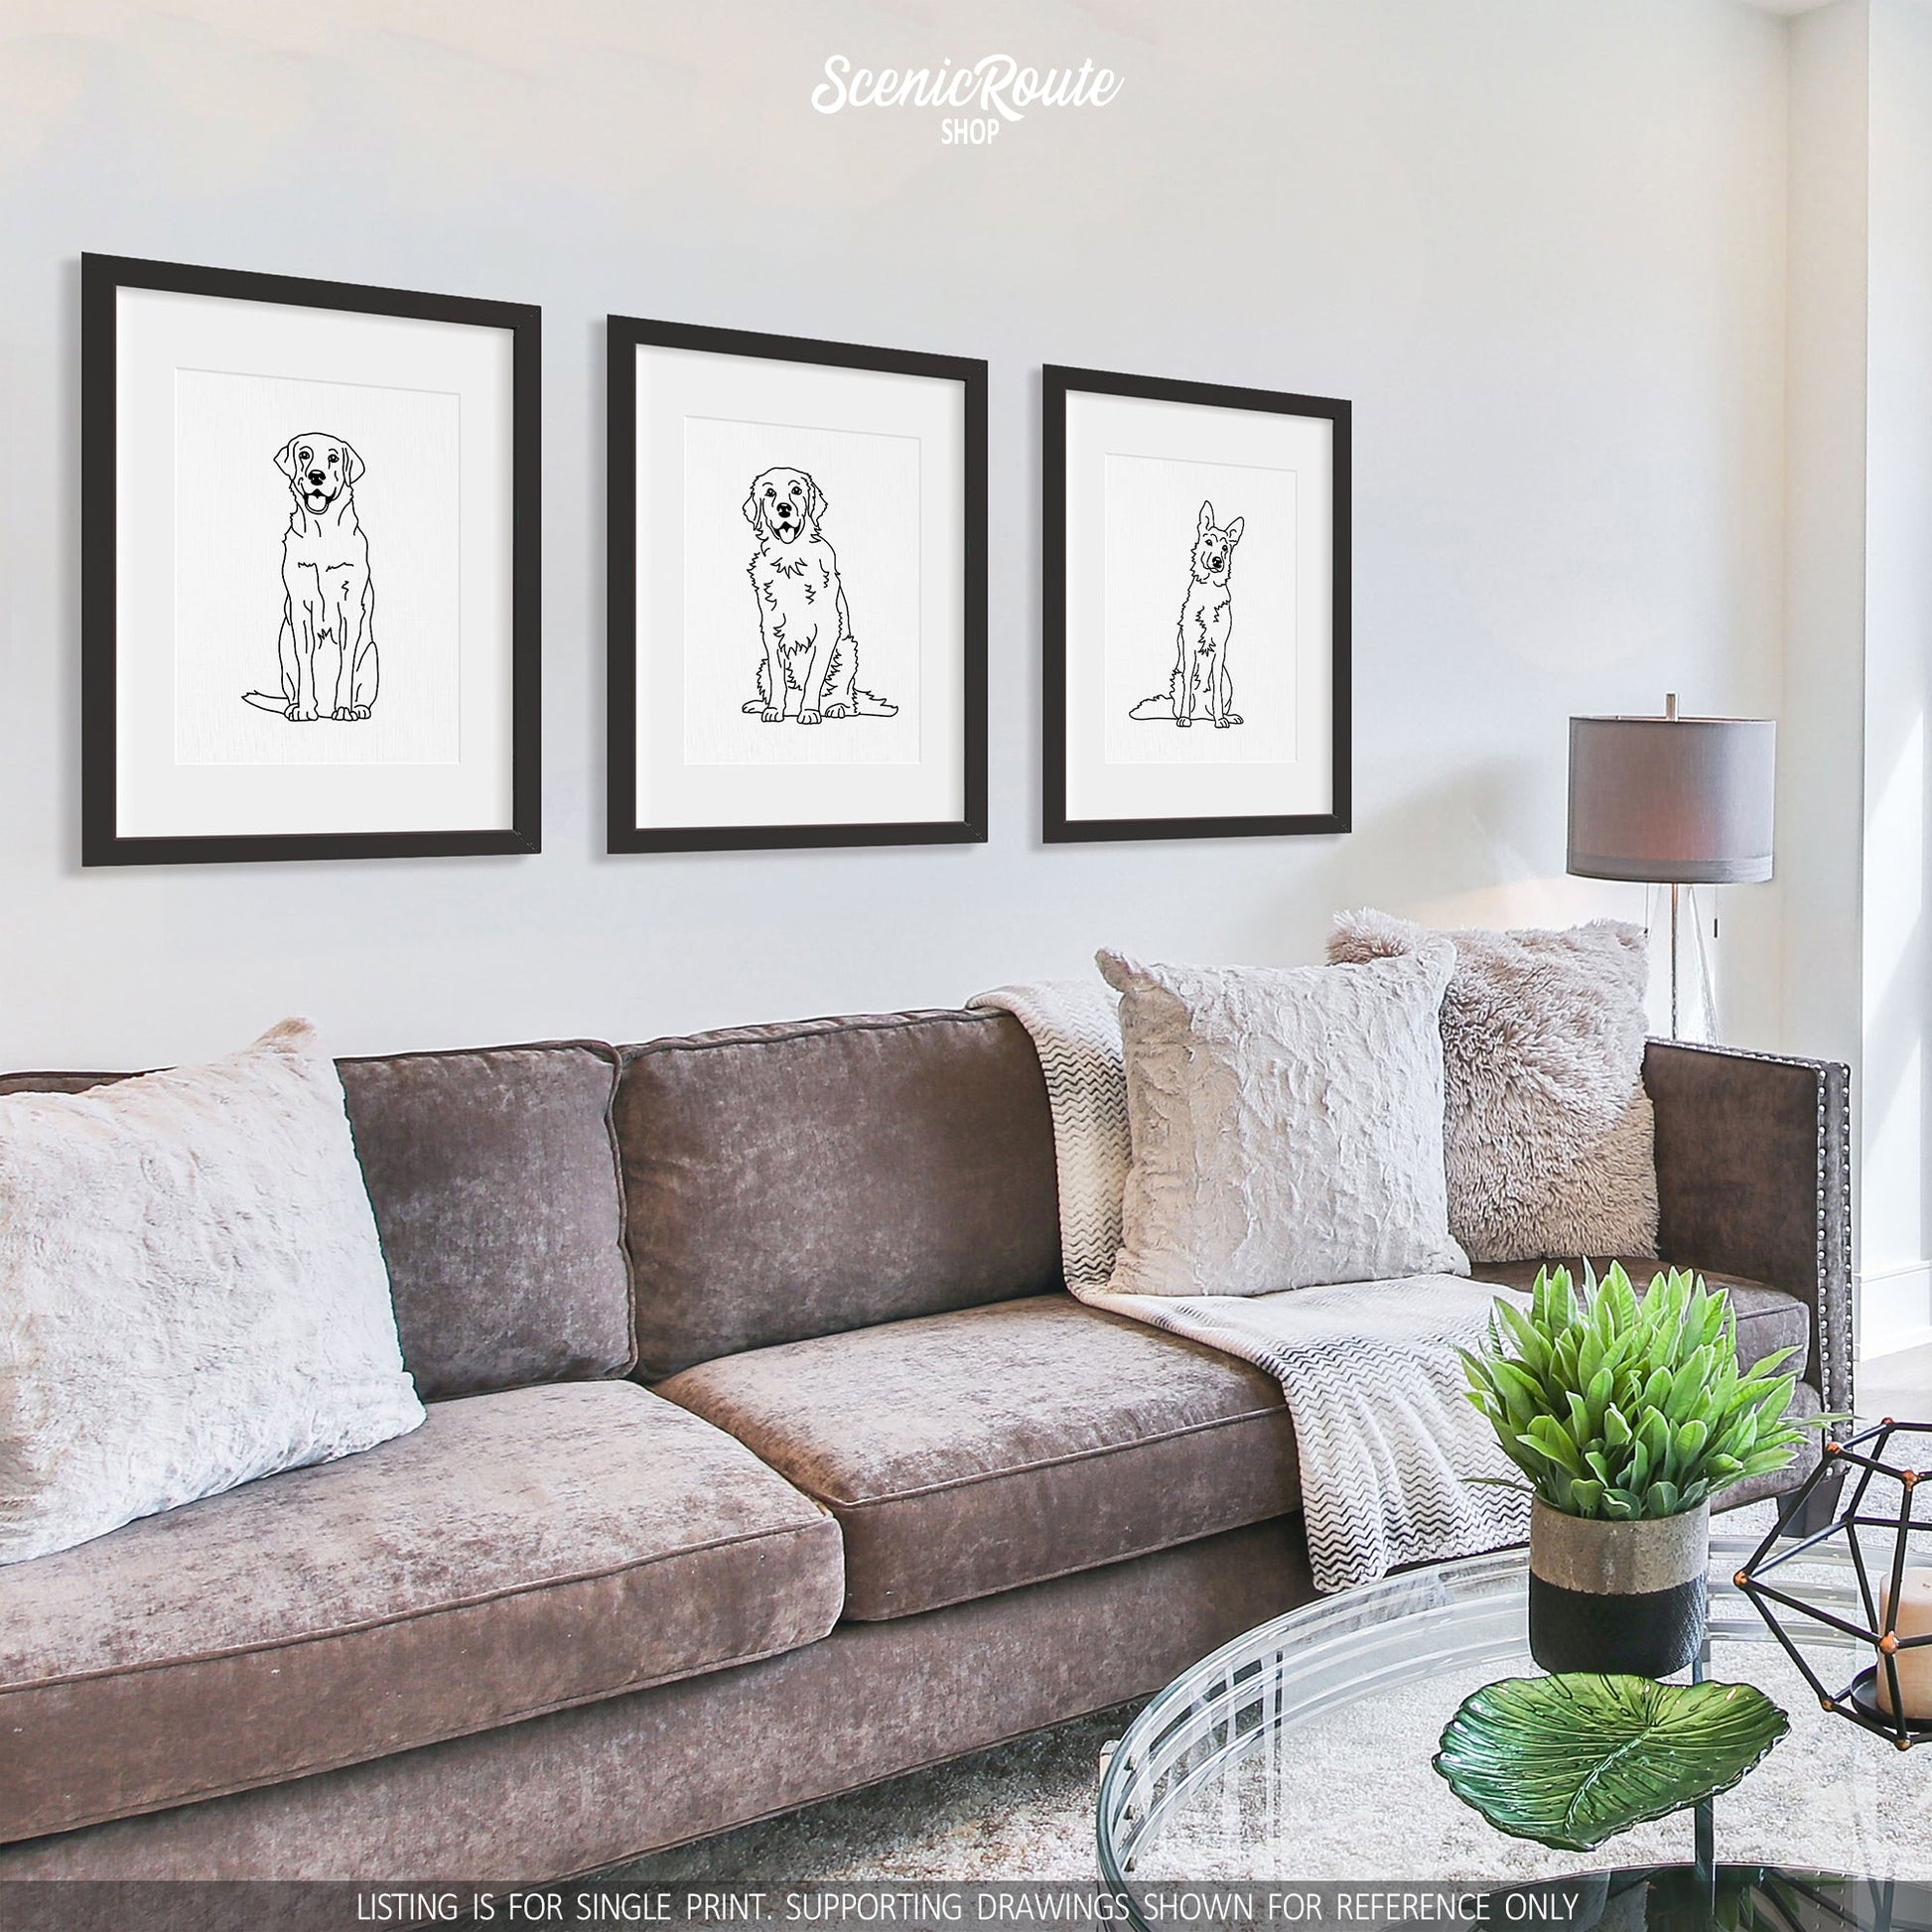 A group of three framed drawings on a white wall above a couch with pillows. The line art drawings include a Labrador dog, a Golden Retriever dog, and a German Shepherd dog